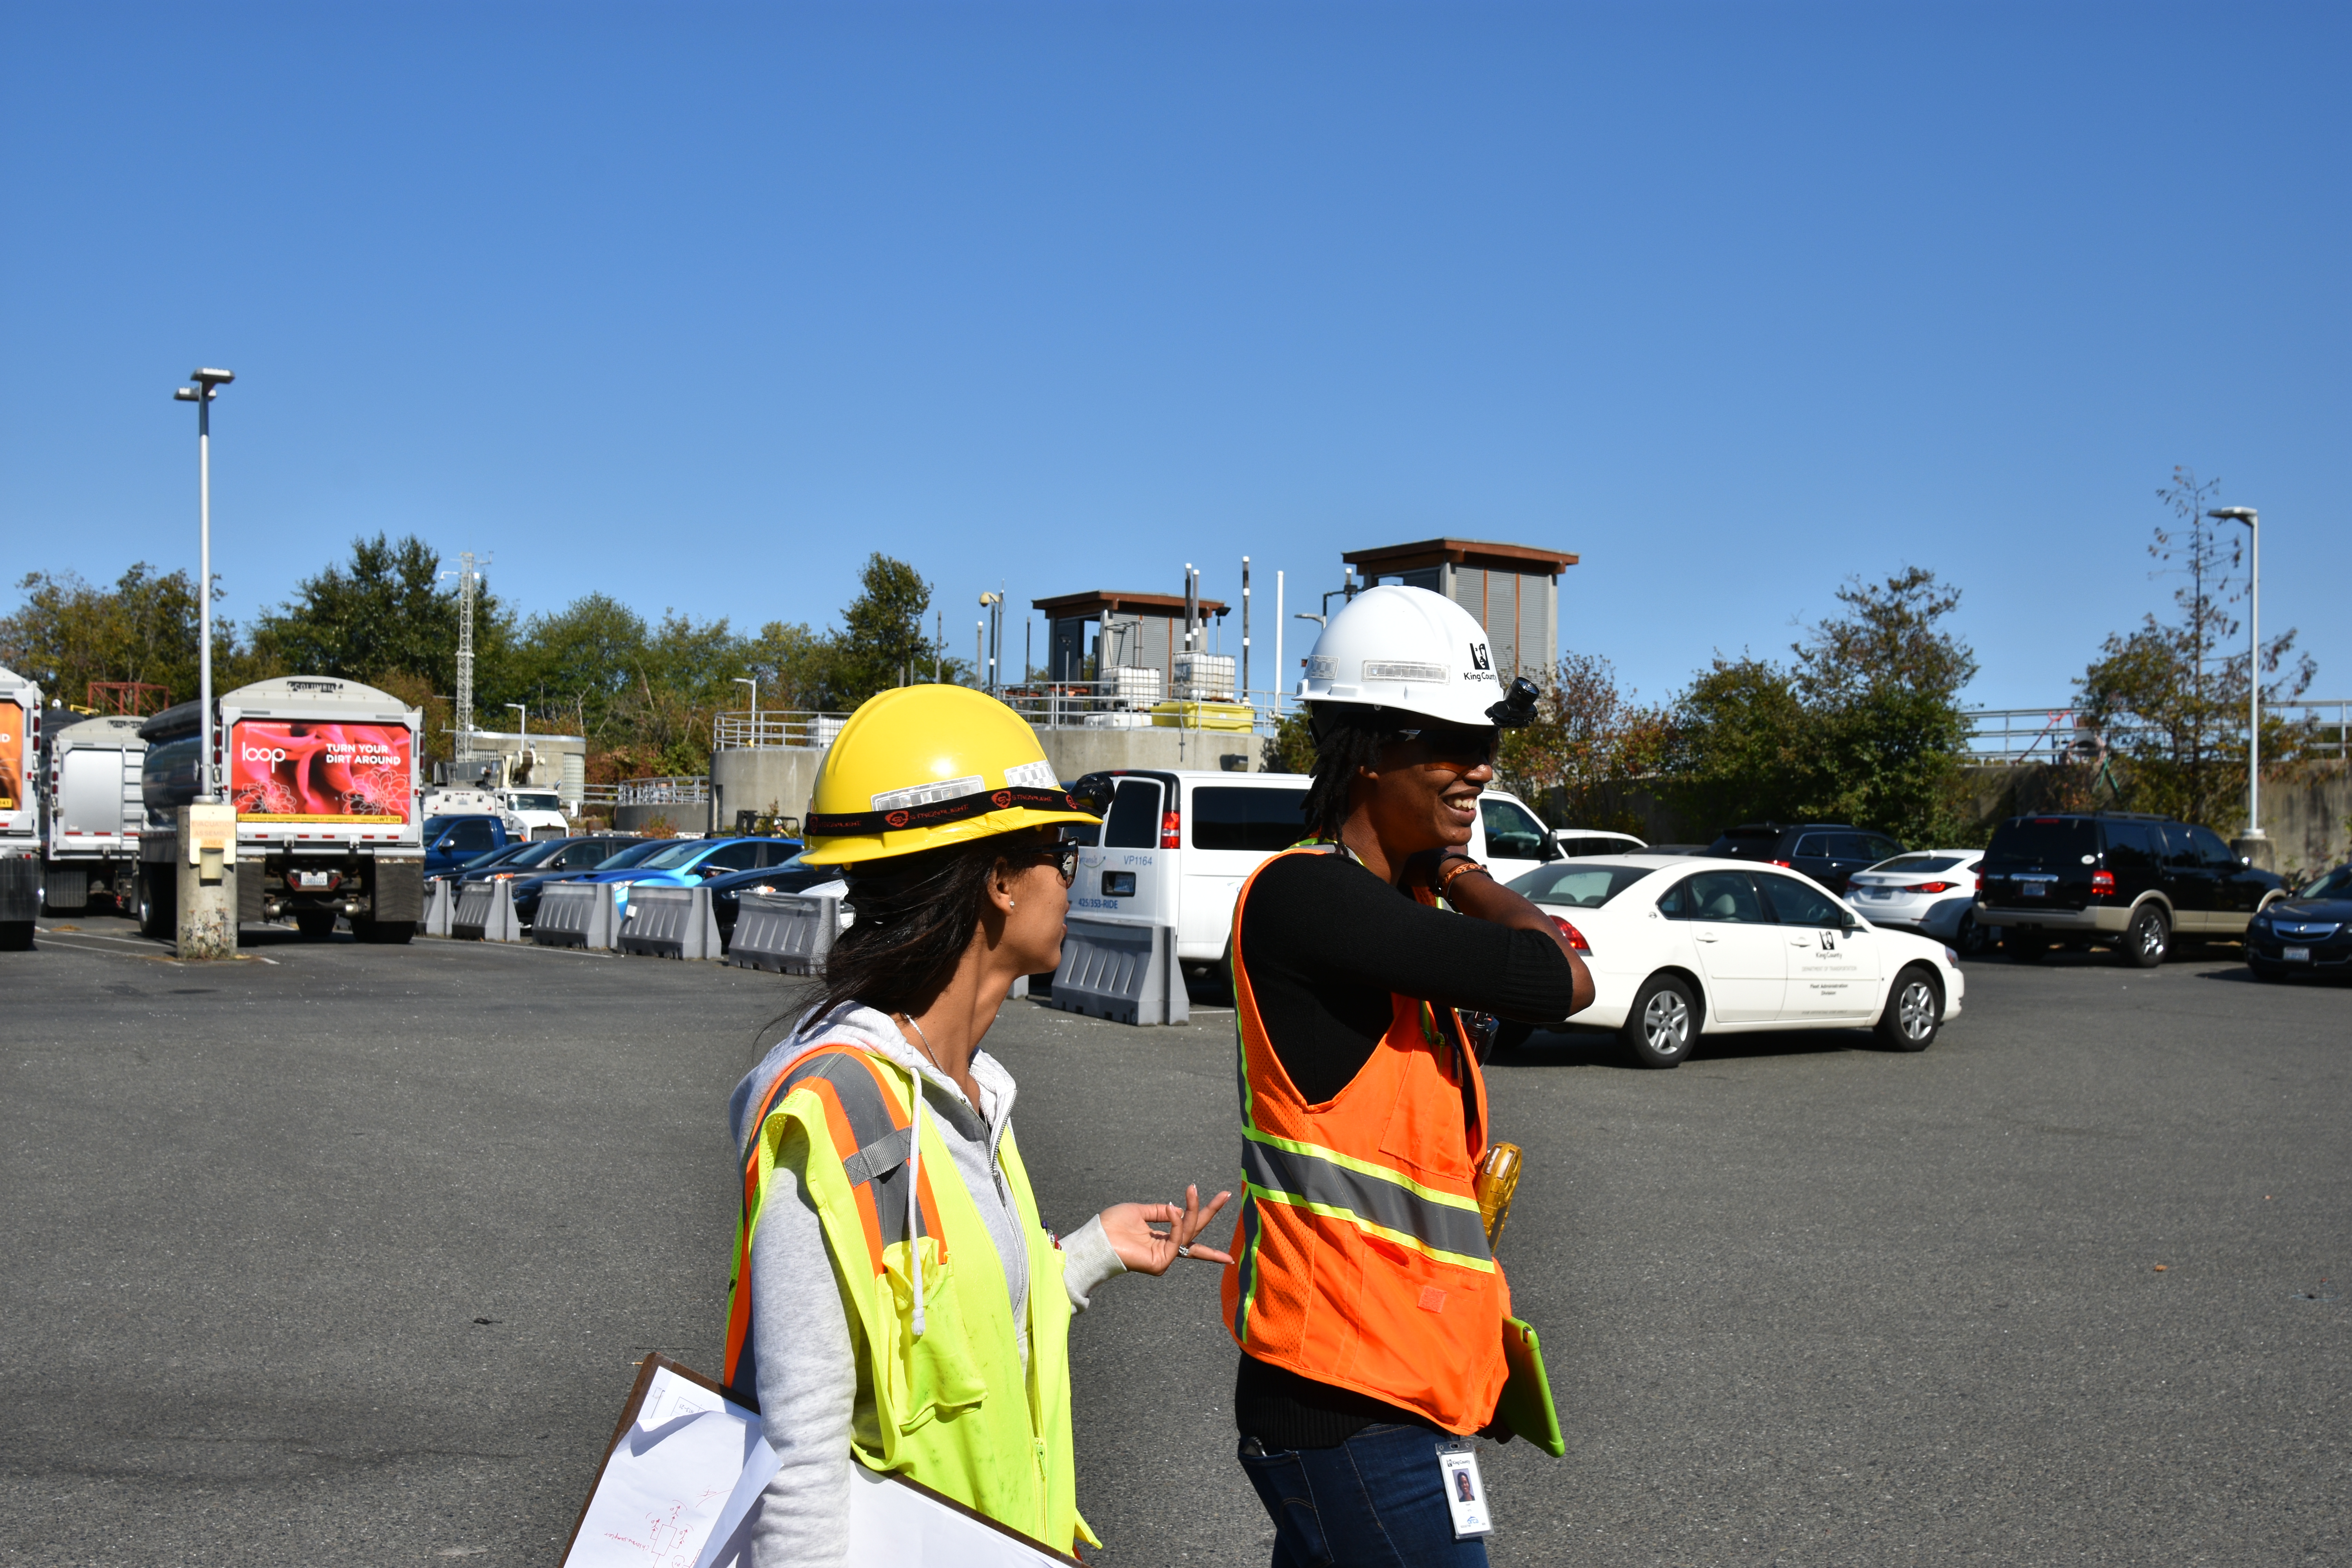 We help new employees learn – and they help take care of everyone’s sewer system